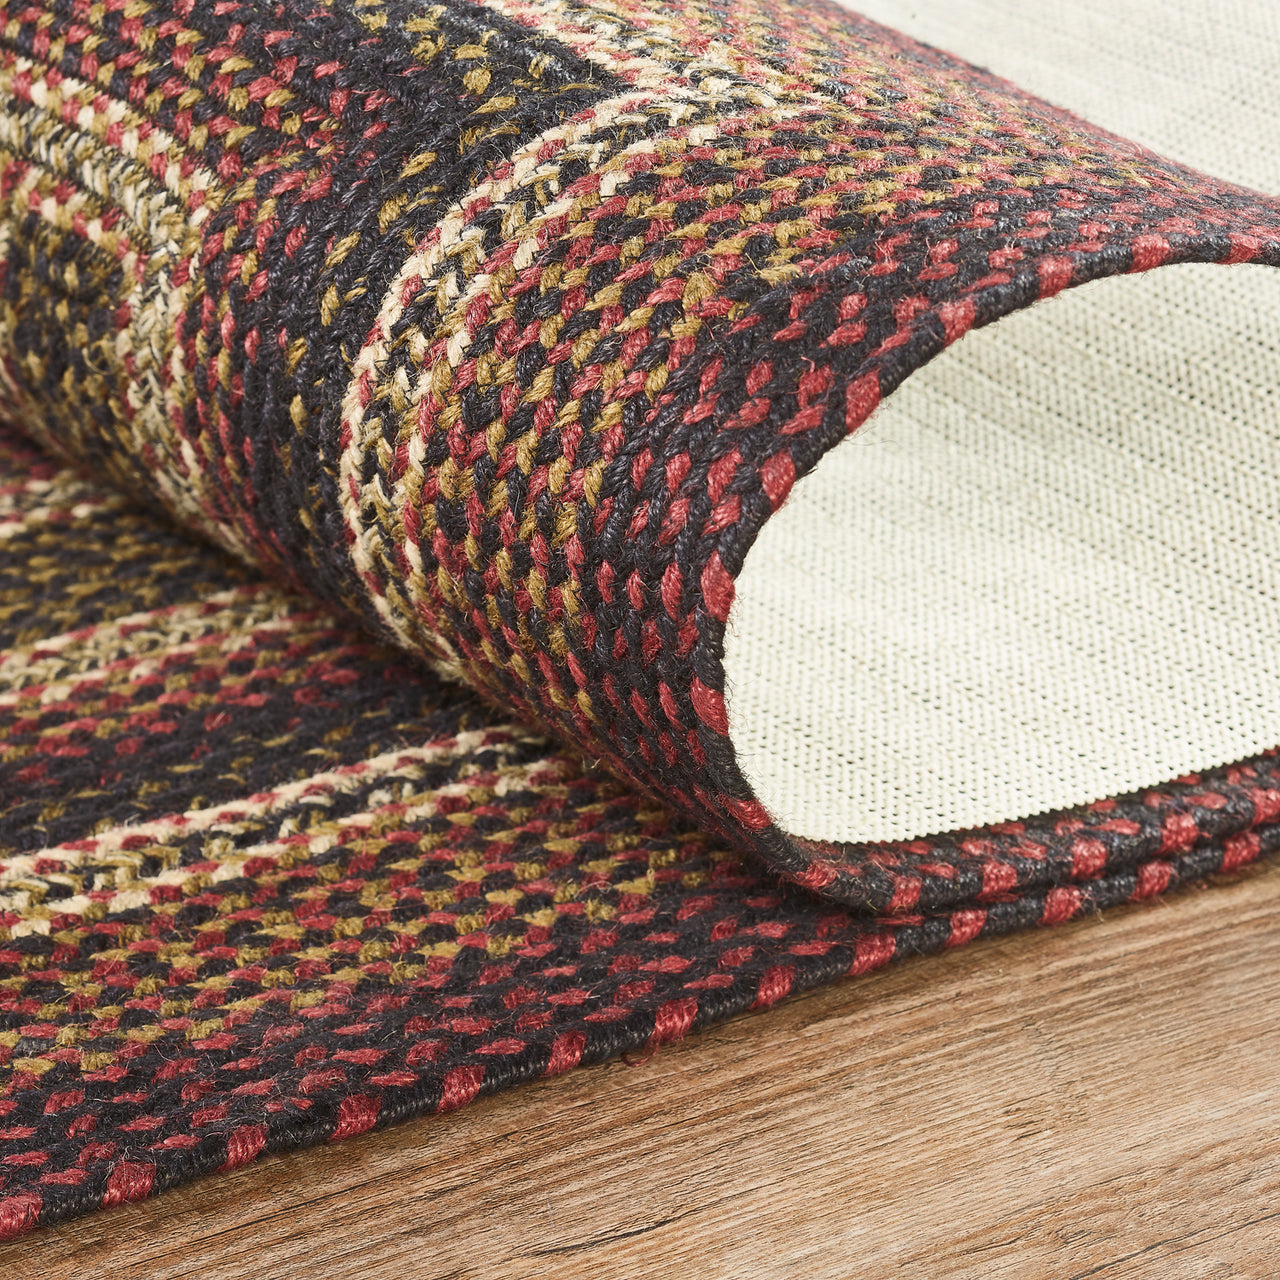 Beckham Jute Braided Rug/Runner Rect with Rug Pad 22"x72" VHC Brands